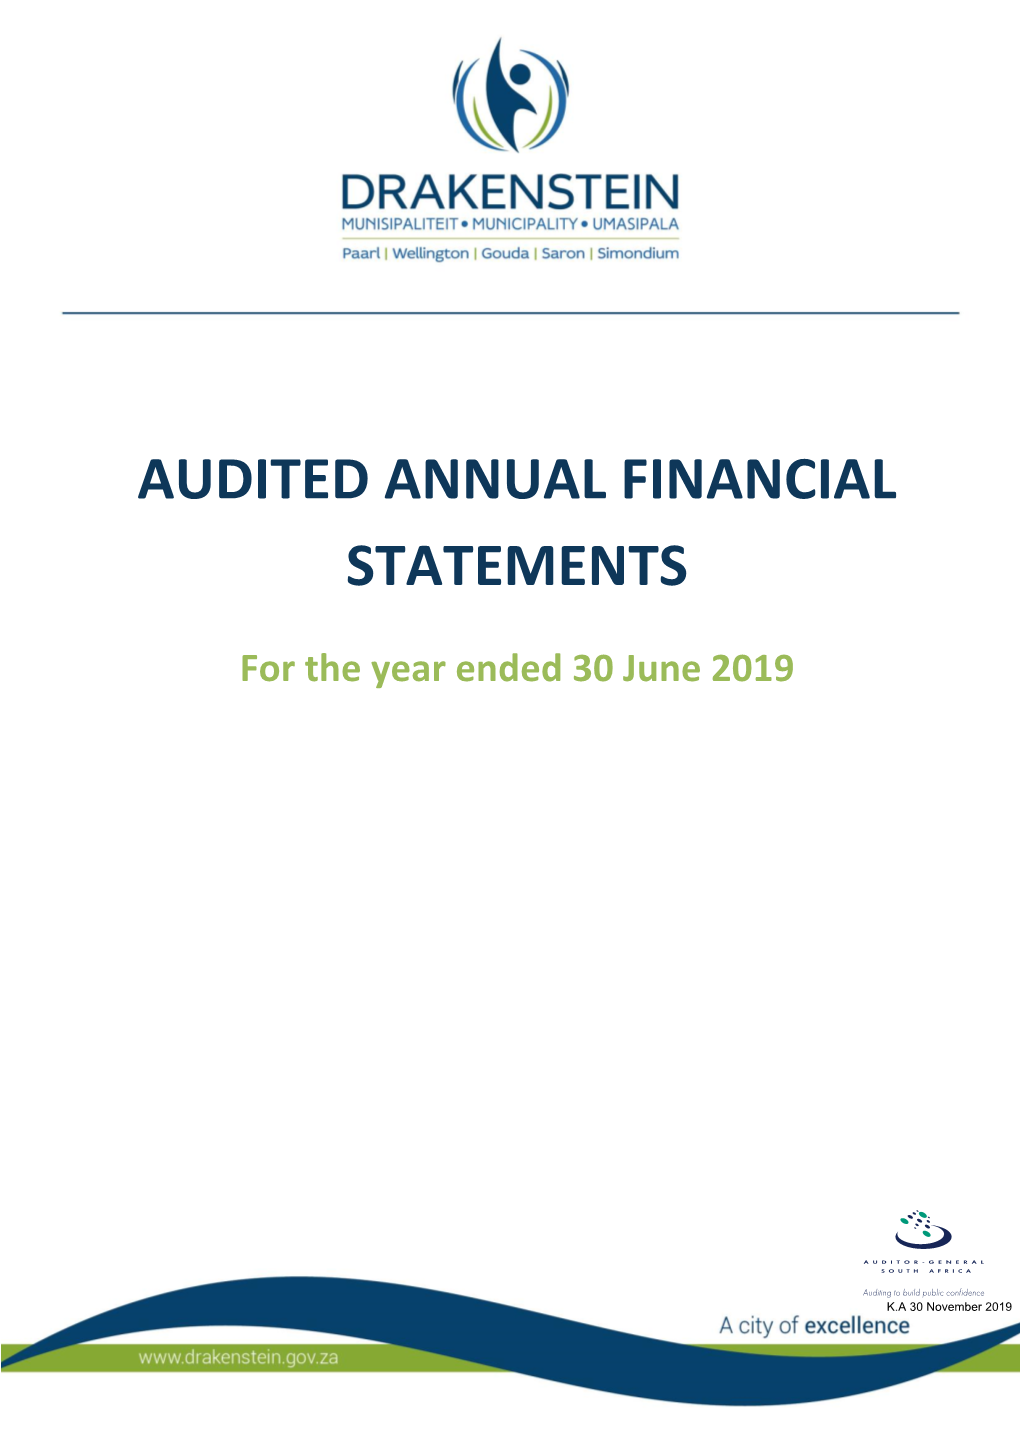 Audited Annual Financial Statements